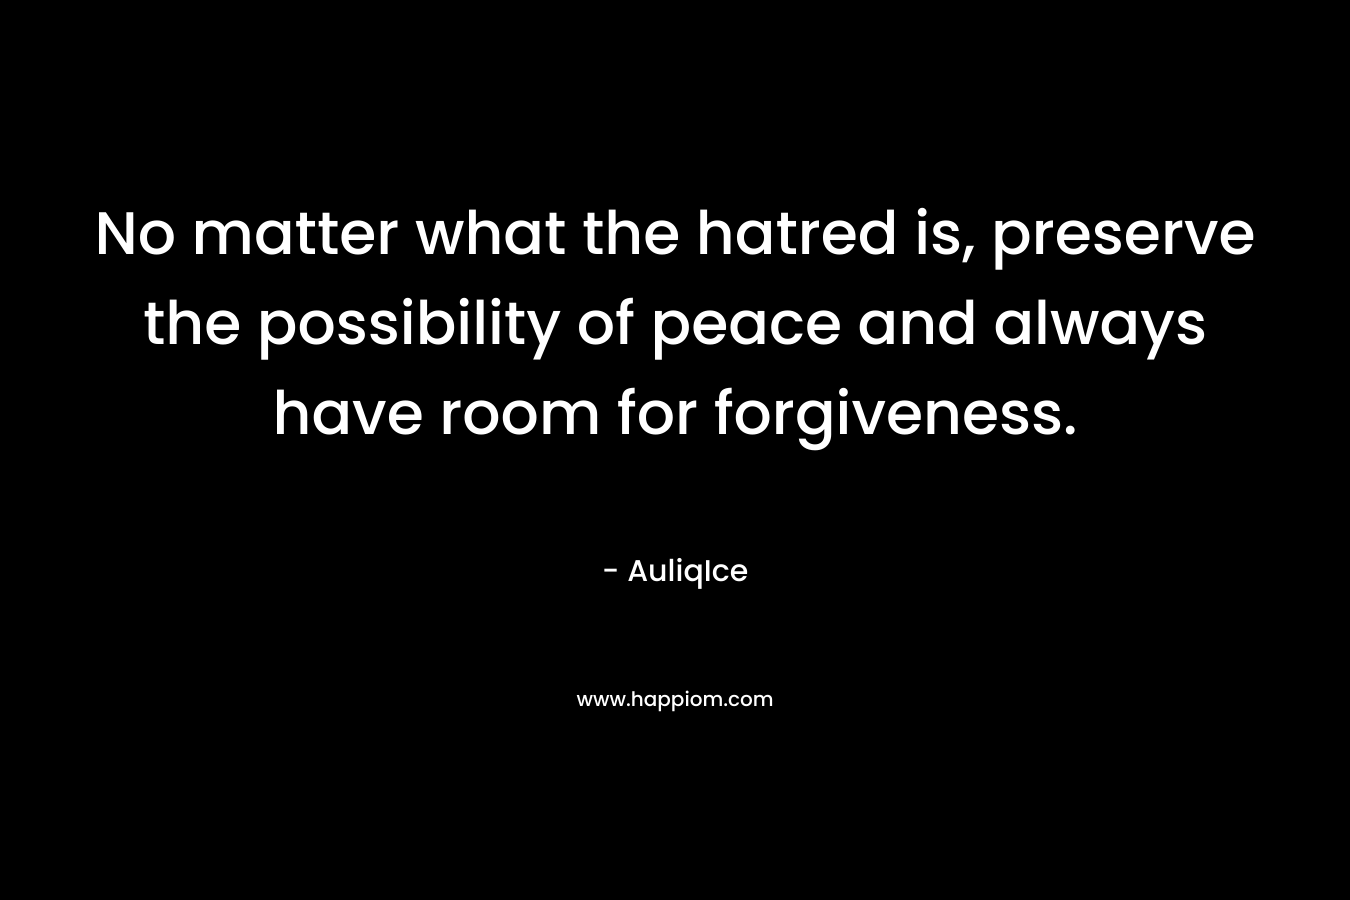 No matter what the hatred is, preserve the possibility of peace and always have room for forgiveness.